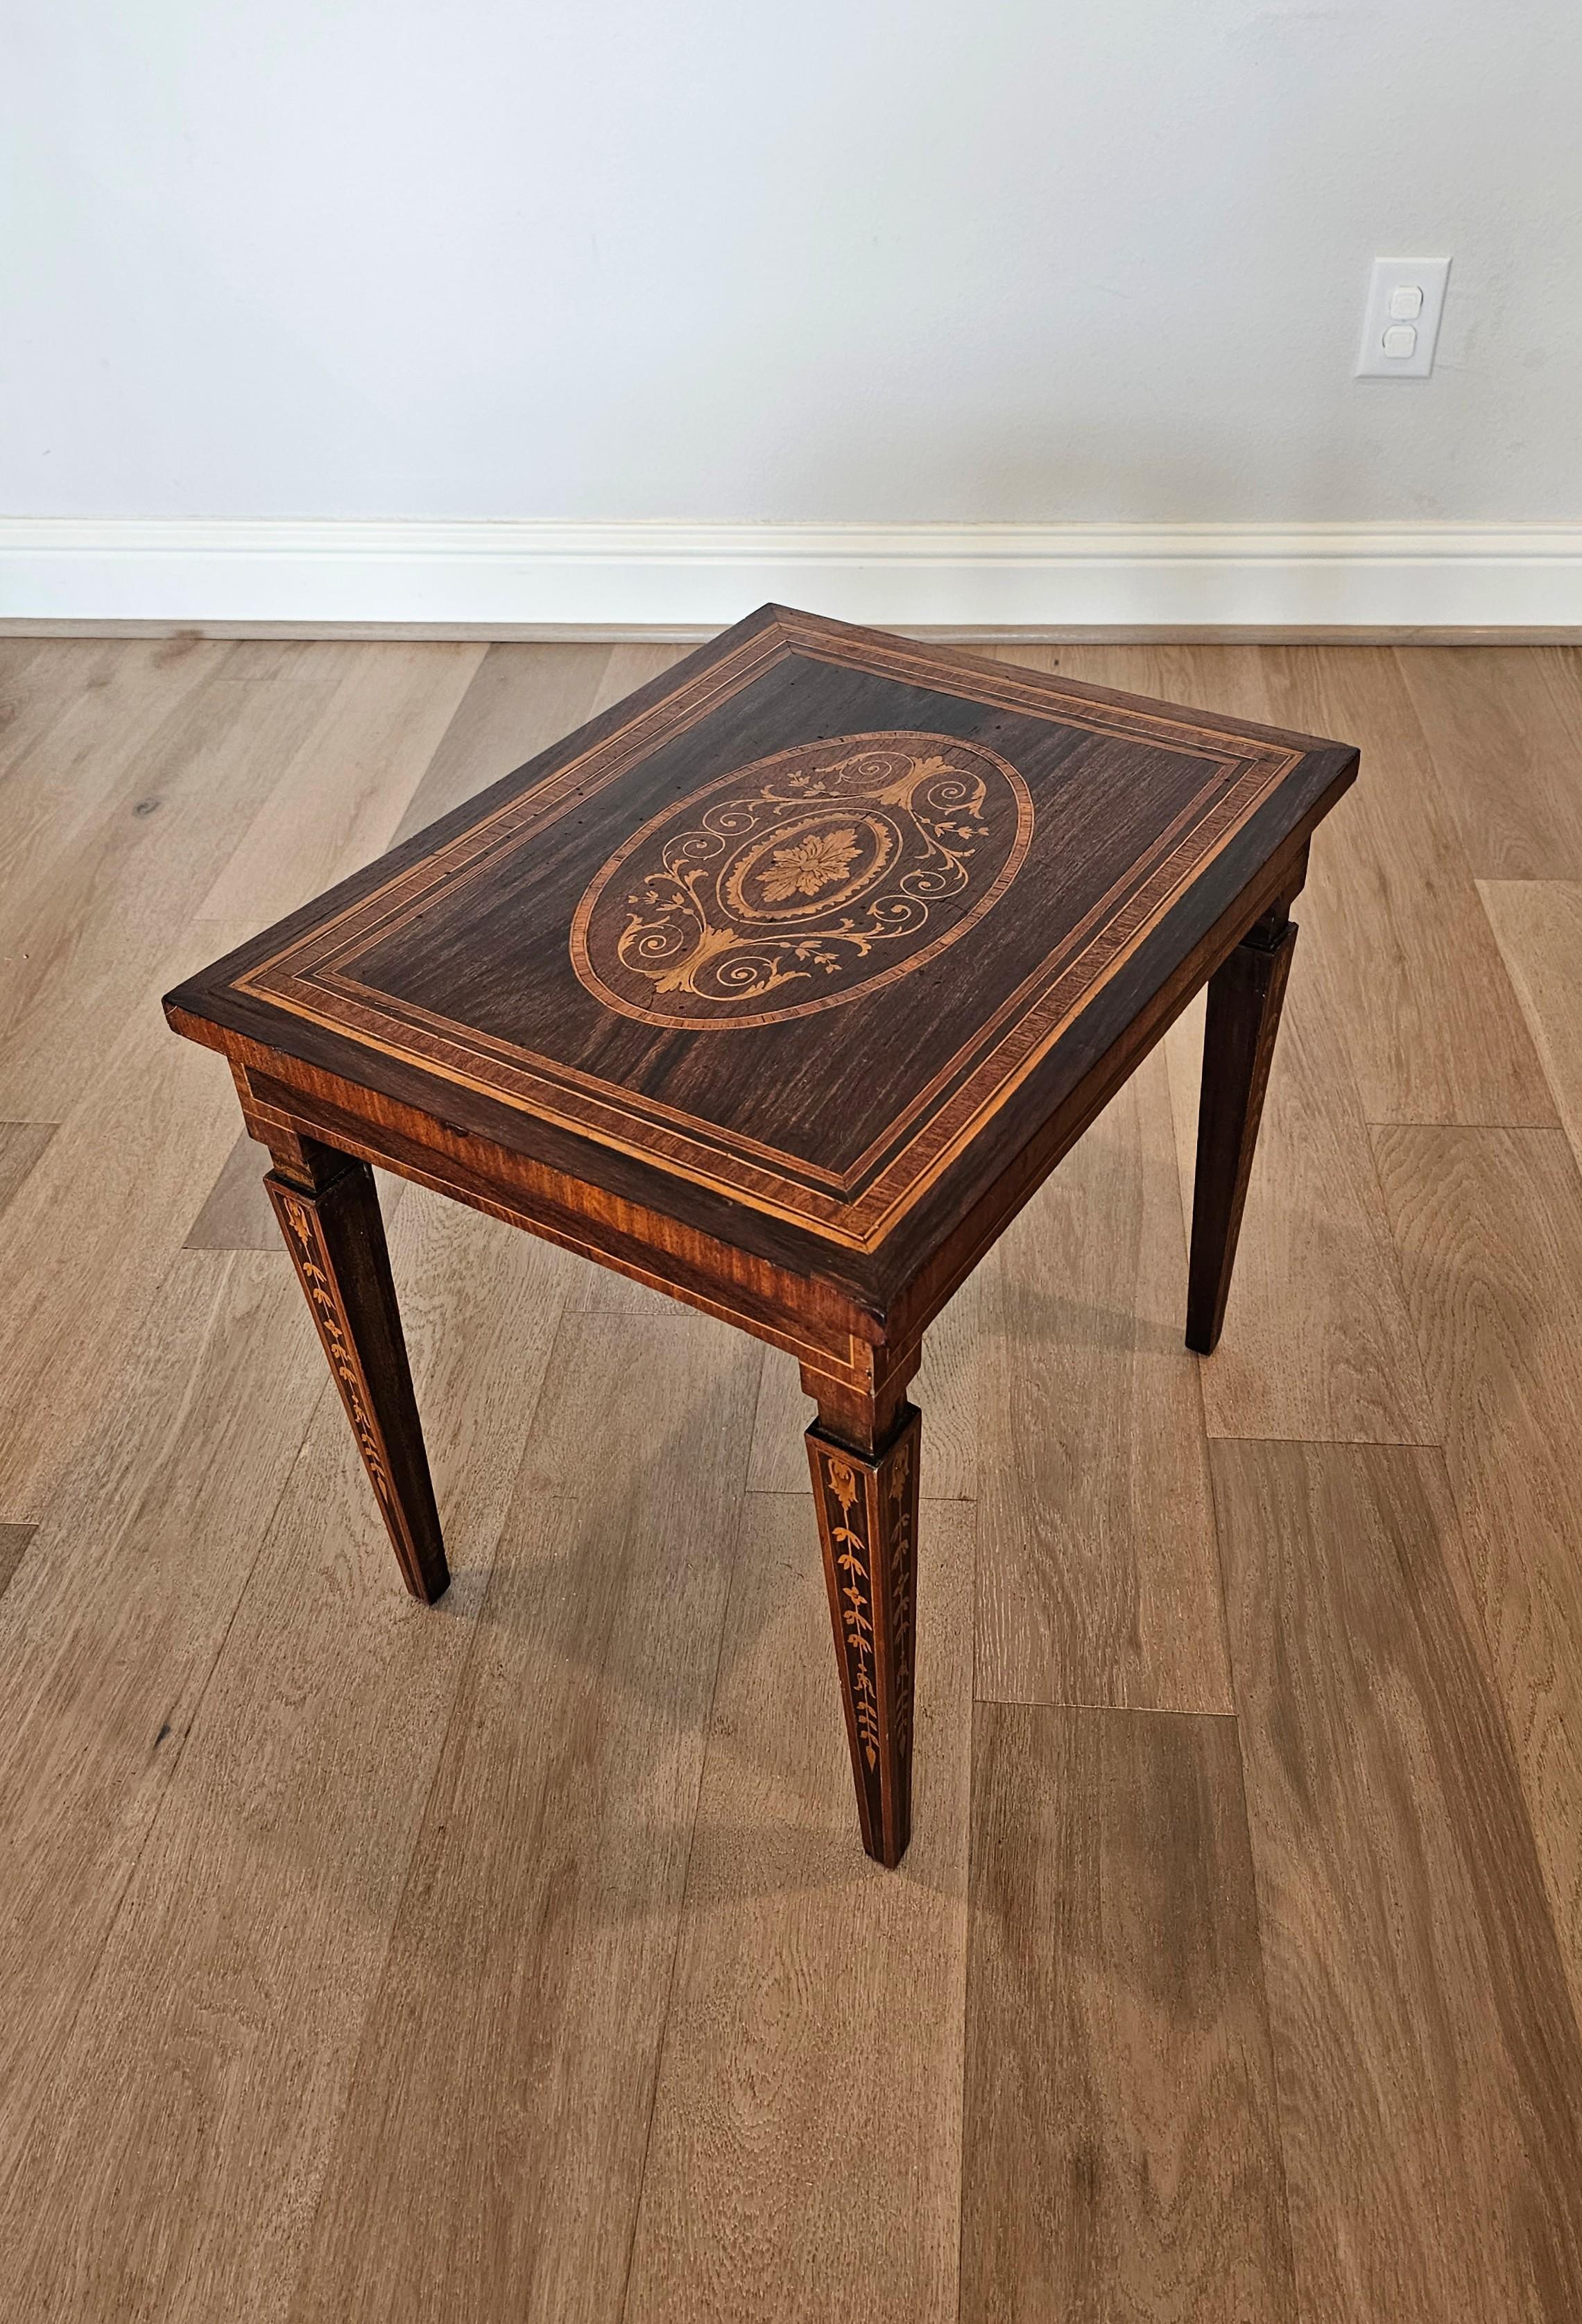 Elegant antique Italian Neoclassical style side table in the manner of Giuseppe Maggiolini (Italian, 1738-1814)

Hand-crafted in Italy in the 19th century, most likely Lombardy region of Northern Italy, finished in Louis XVI taste, featuring solid